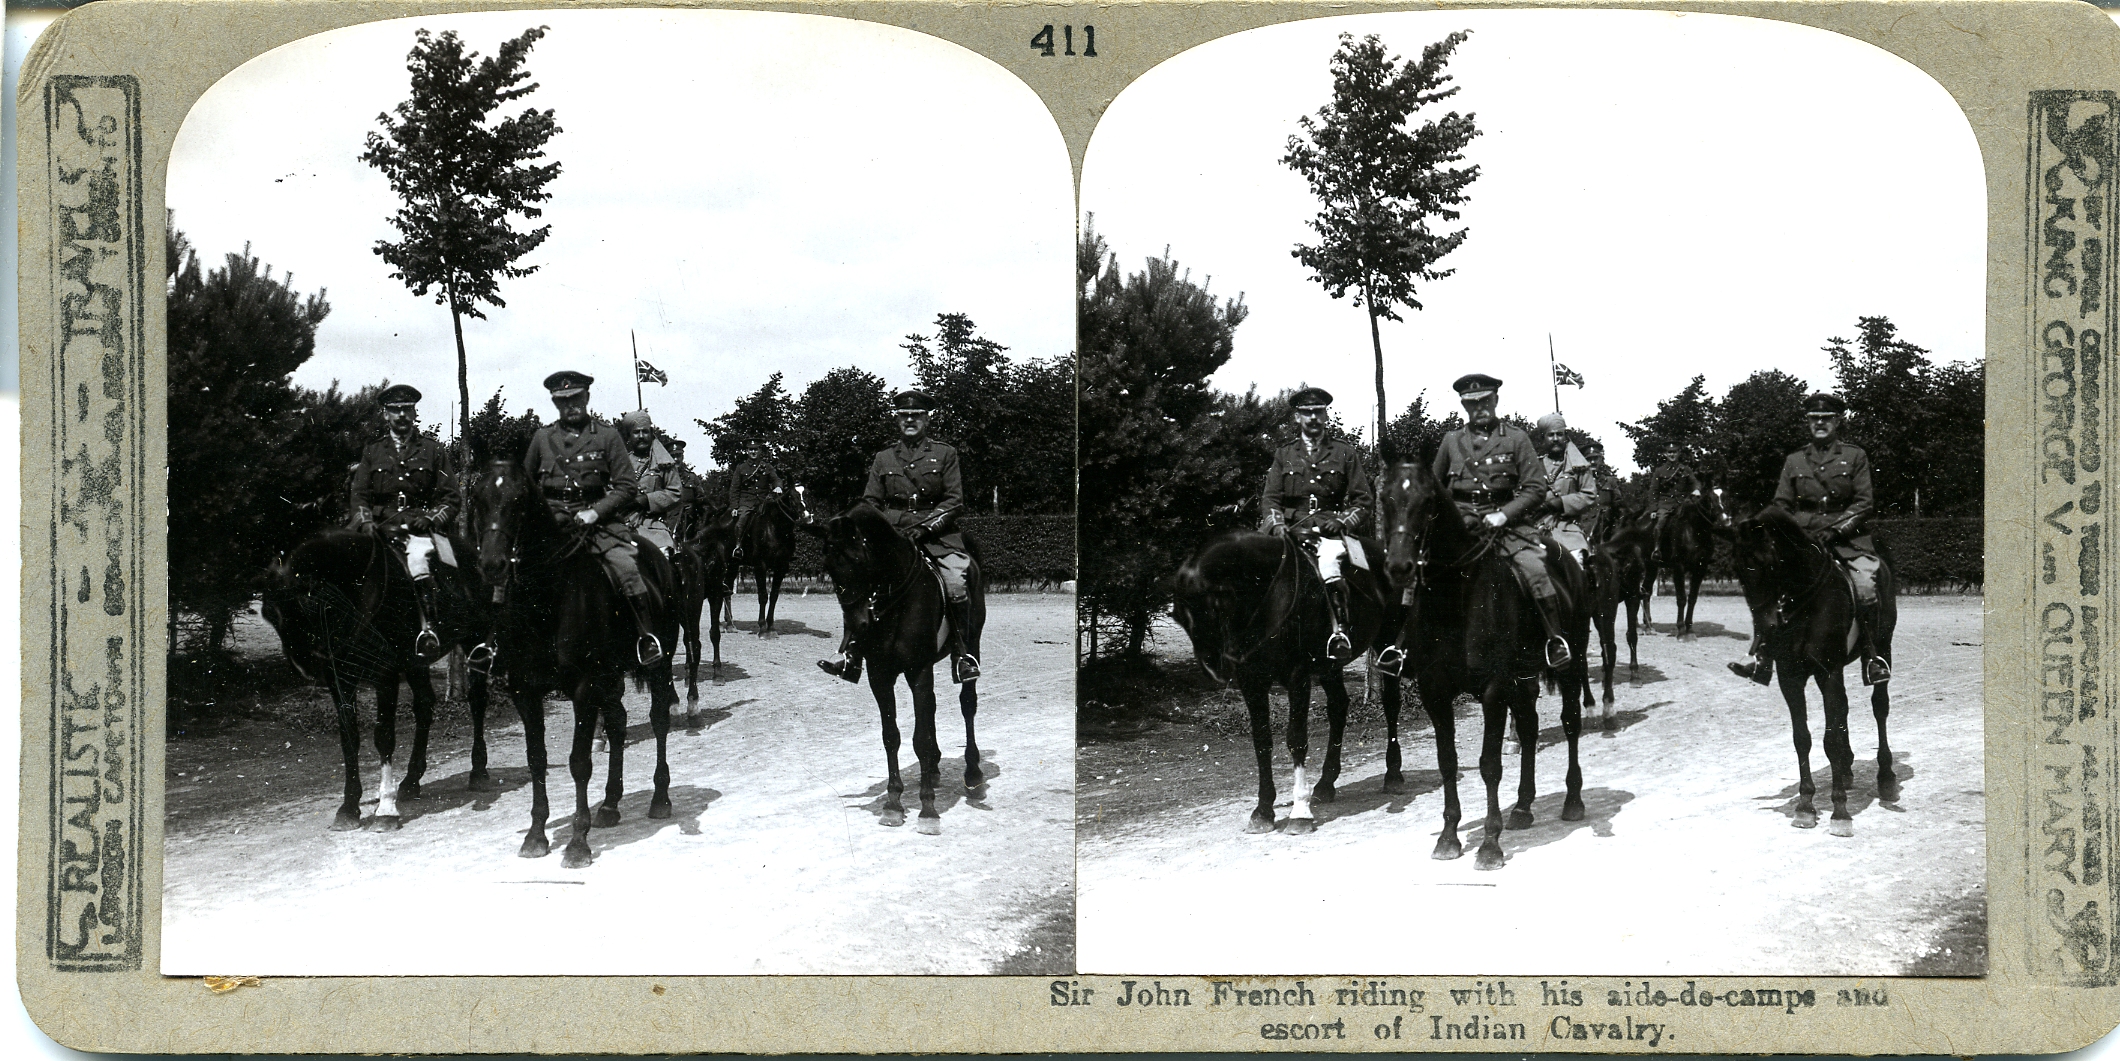 Sir John French riding with his aide-de-camps and escort of Indian cavalry